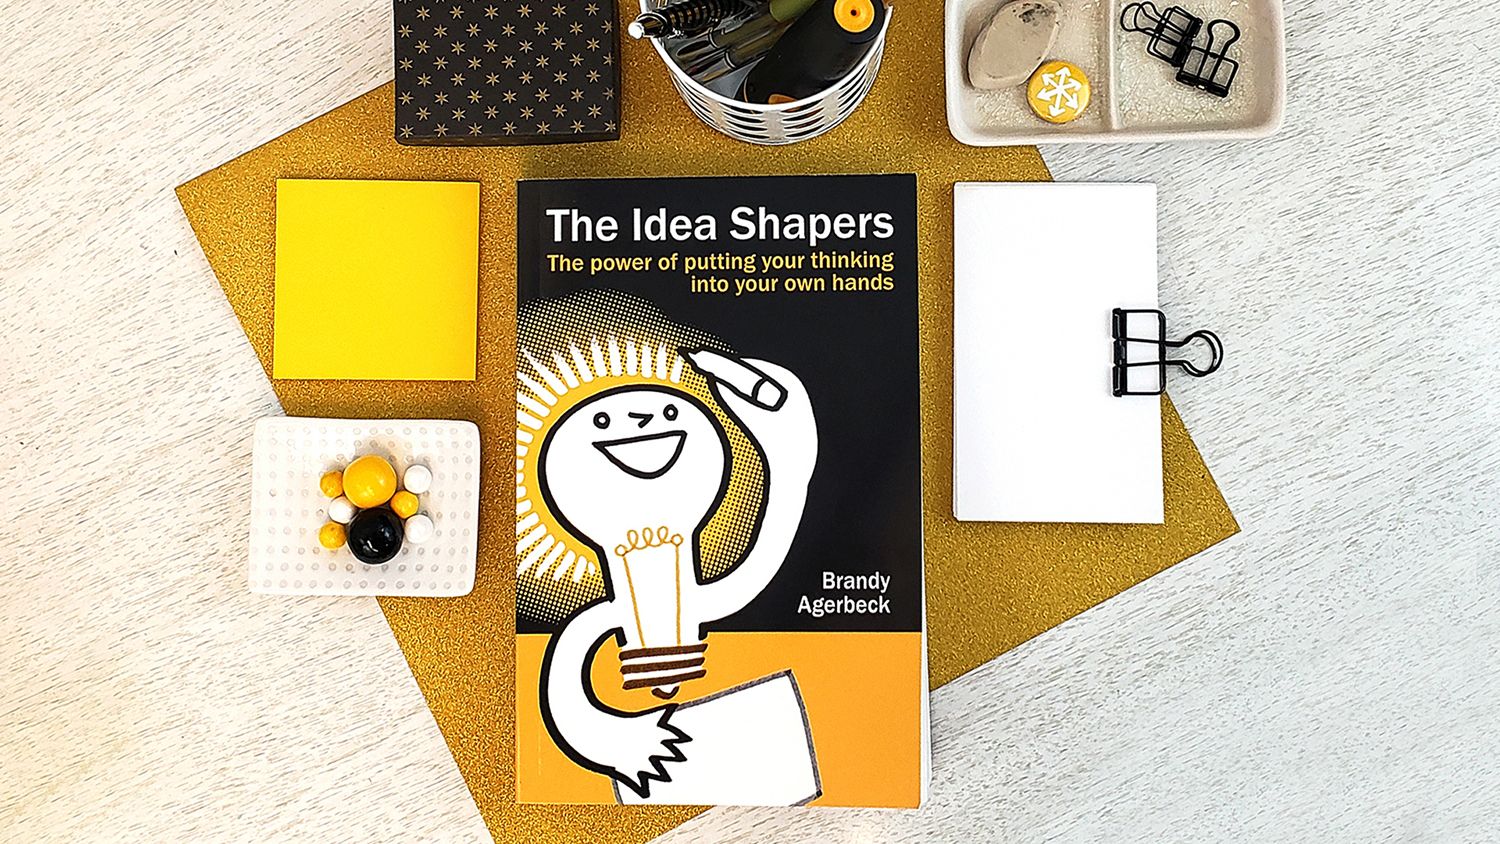 The Idea Shapers